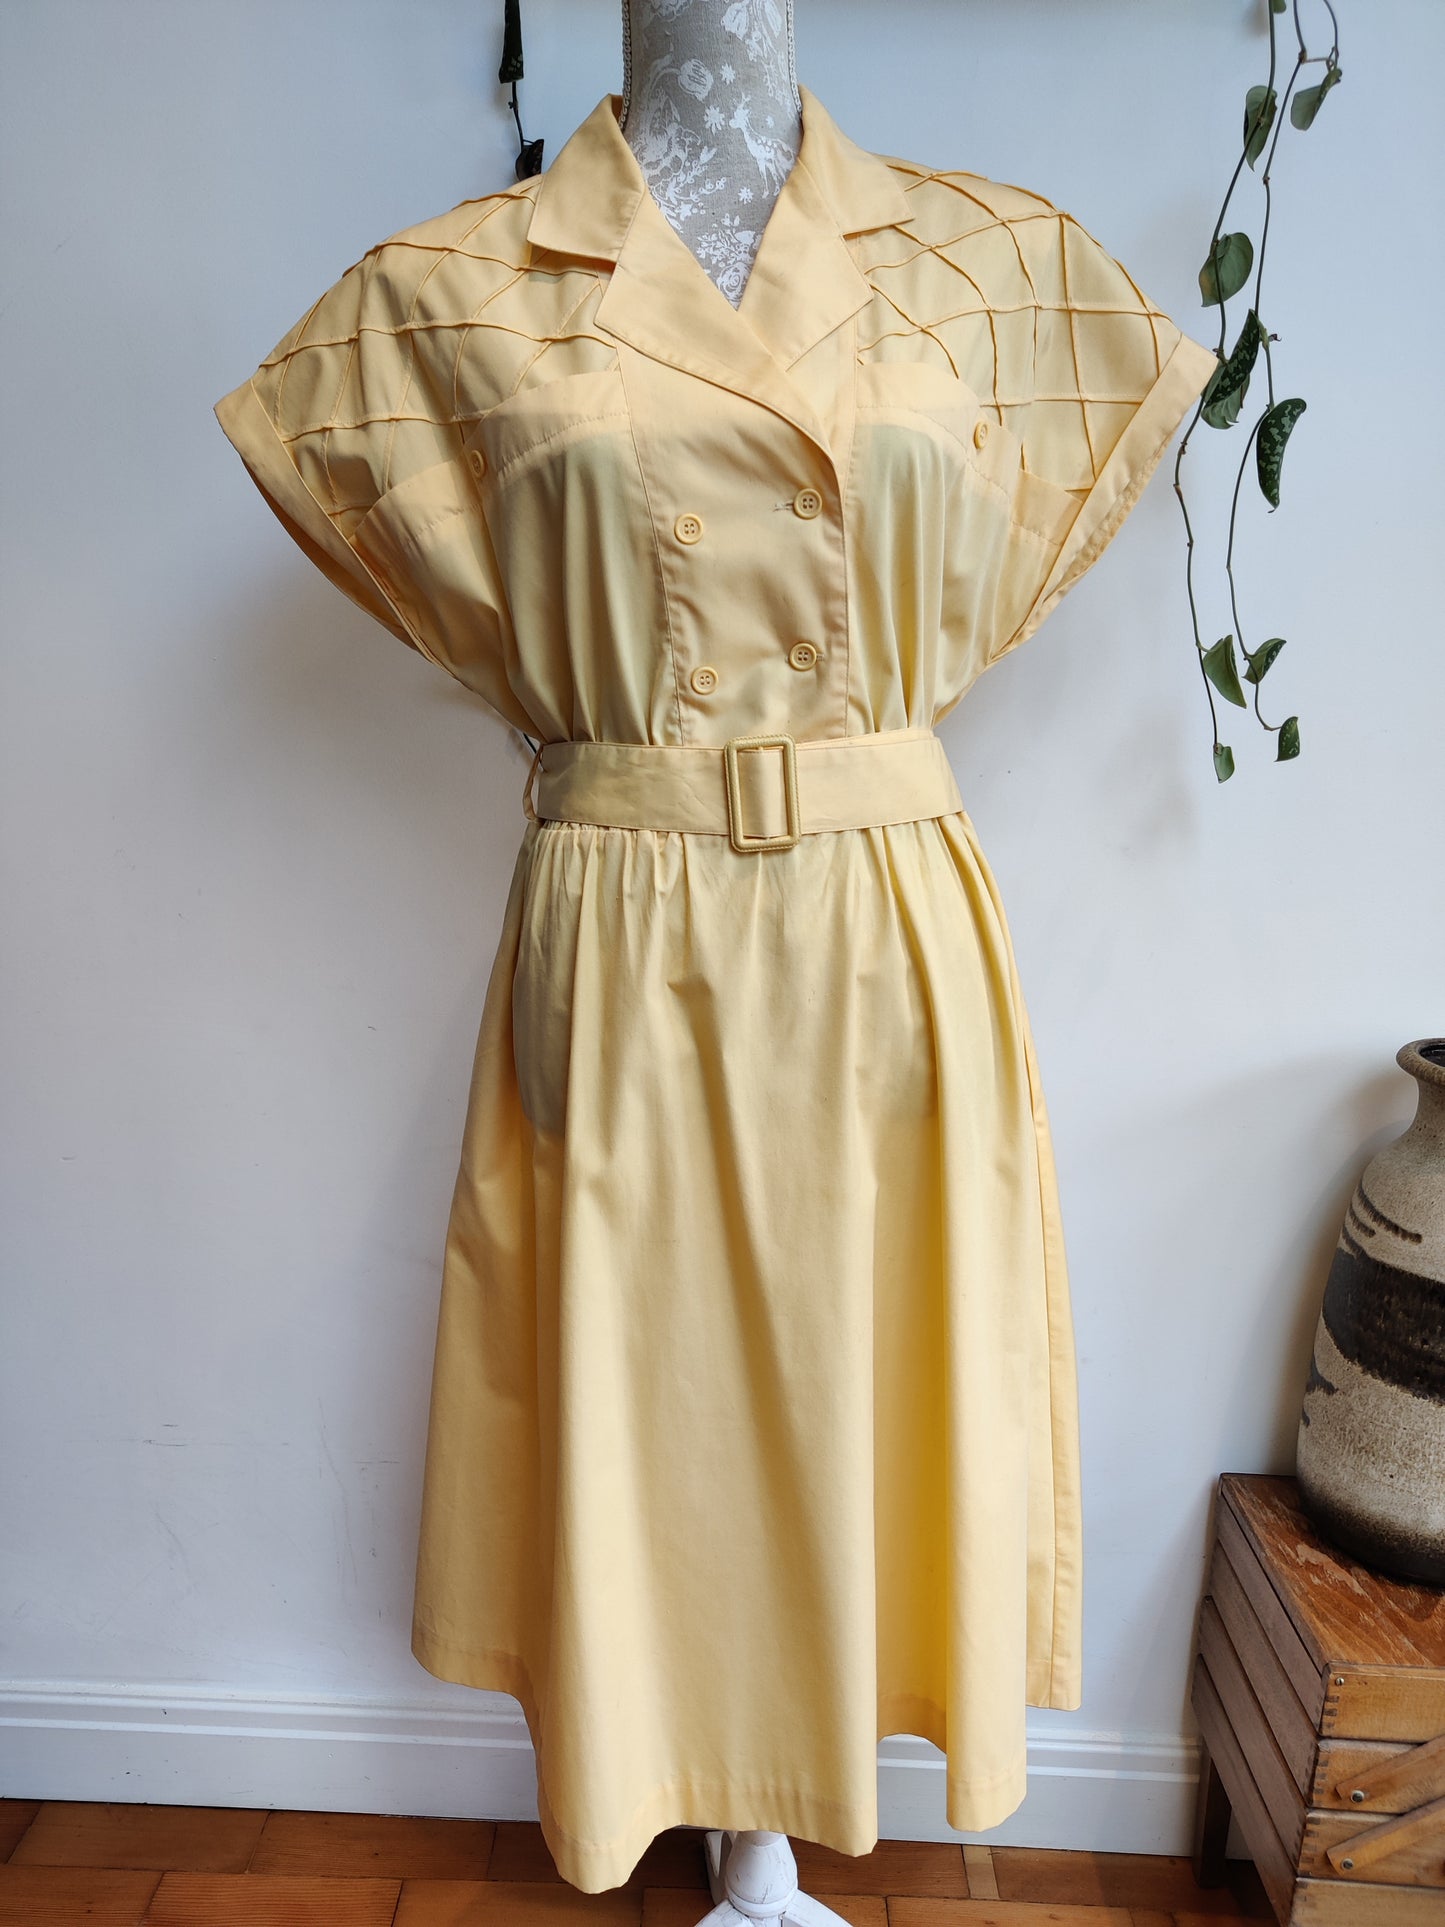 Stunning 80s yellow midi dress with button detail. Size 14-16